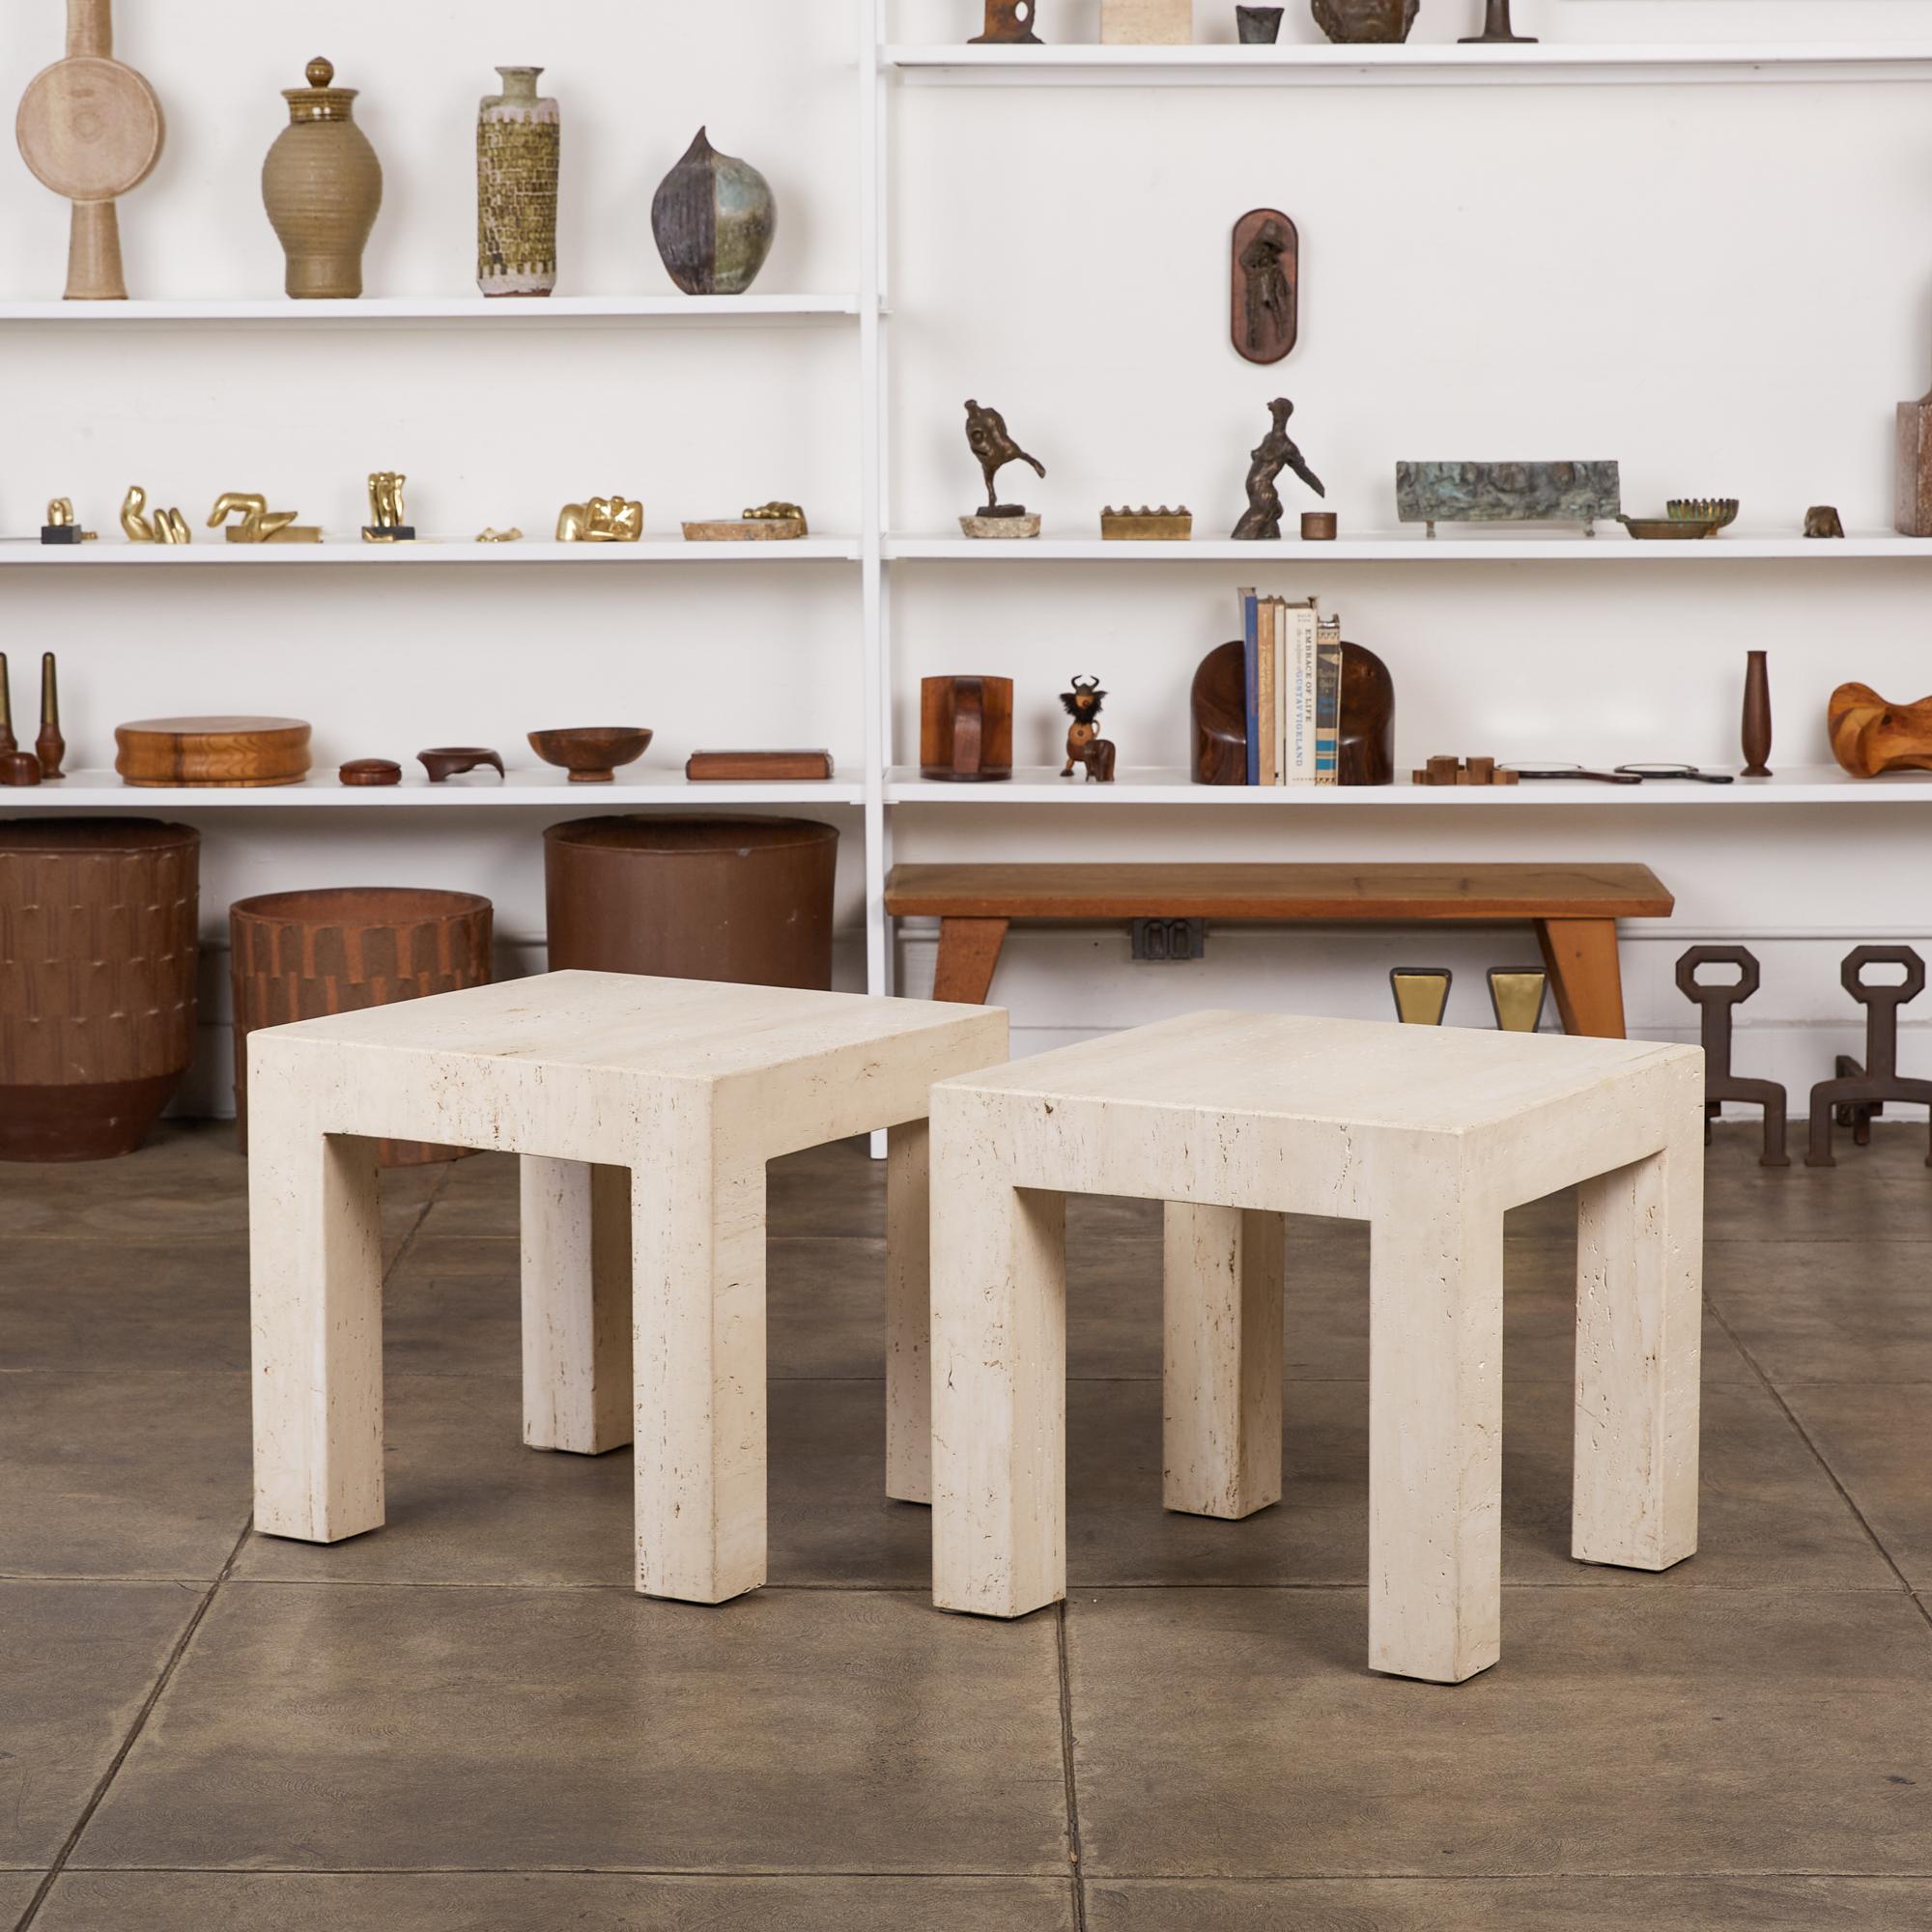 Pair of Postmodern travertine side tables, Italy, c.1970s. These square tables have thick travertine tops, that sit atop four square column legs. With a sleek shape that is reminiscent of tables designed by Italian legends Mario Bellini and Angelo